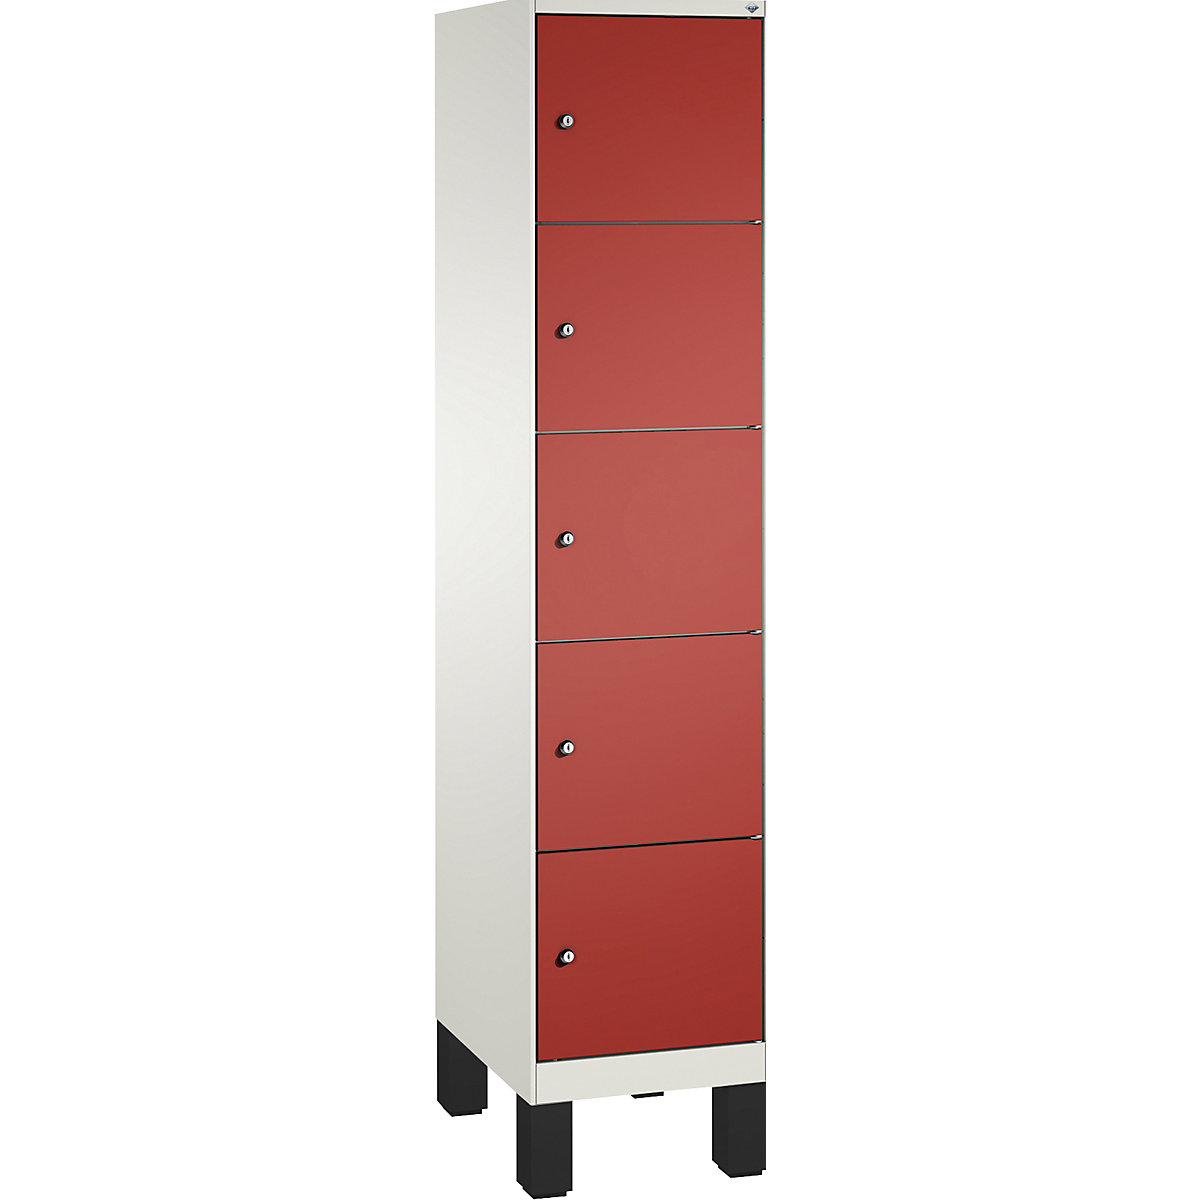 EVOLO locker unit, with feet – C+P, 1 compartment, 5 shelf compartments, compartment width 400 mm, traffic white / flame red-6